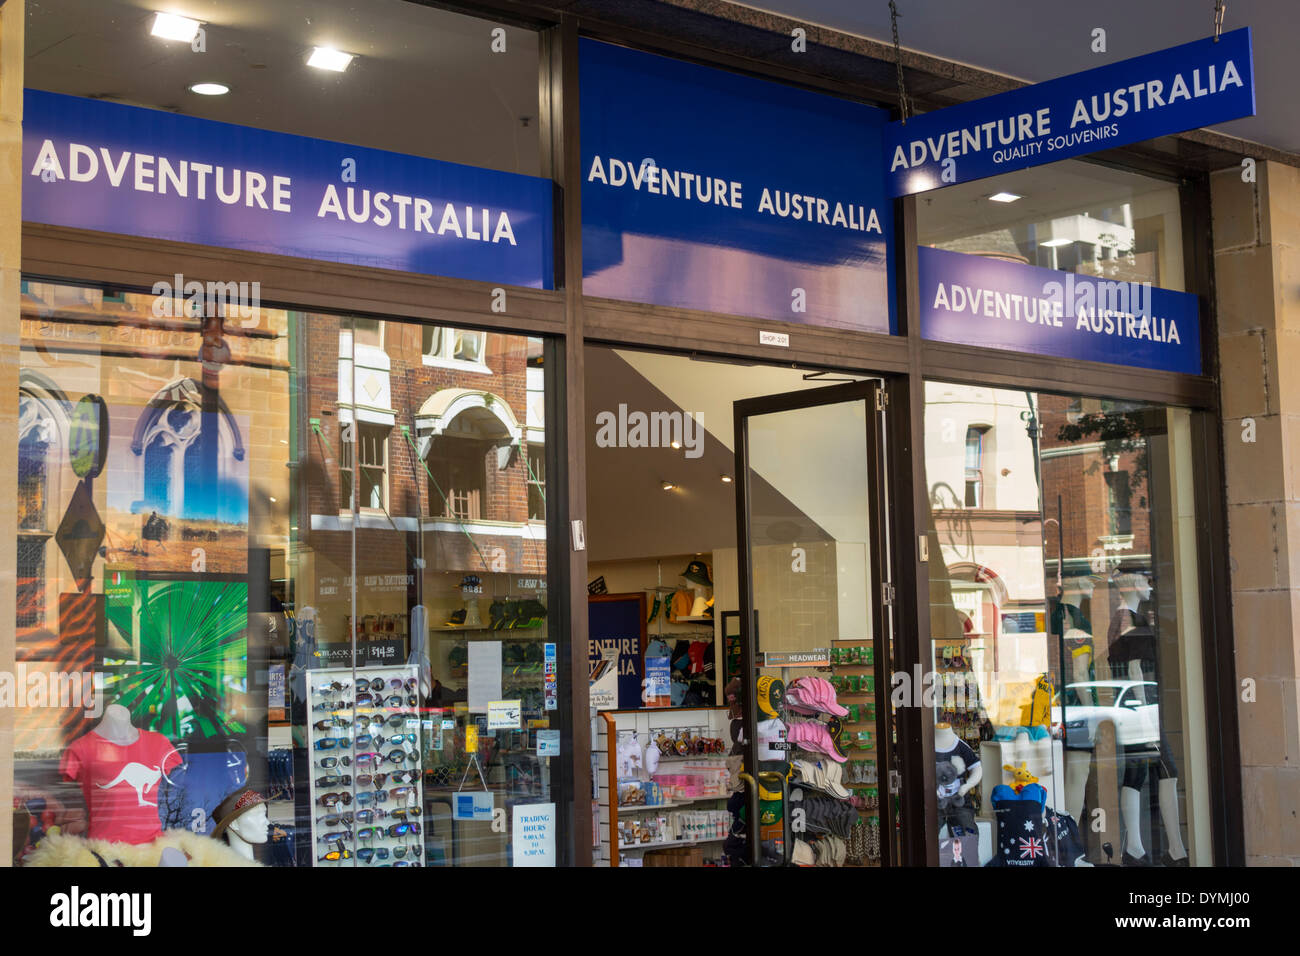 Sydney Australia,The Rocks,George Street,district,shopping shopper shoppers shop shops market markets marketplace buying selling,retail store stores b Stock Photo